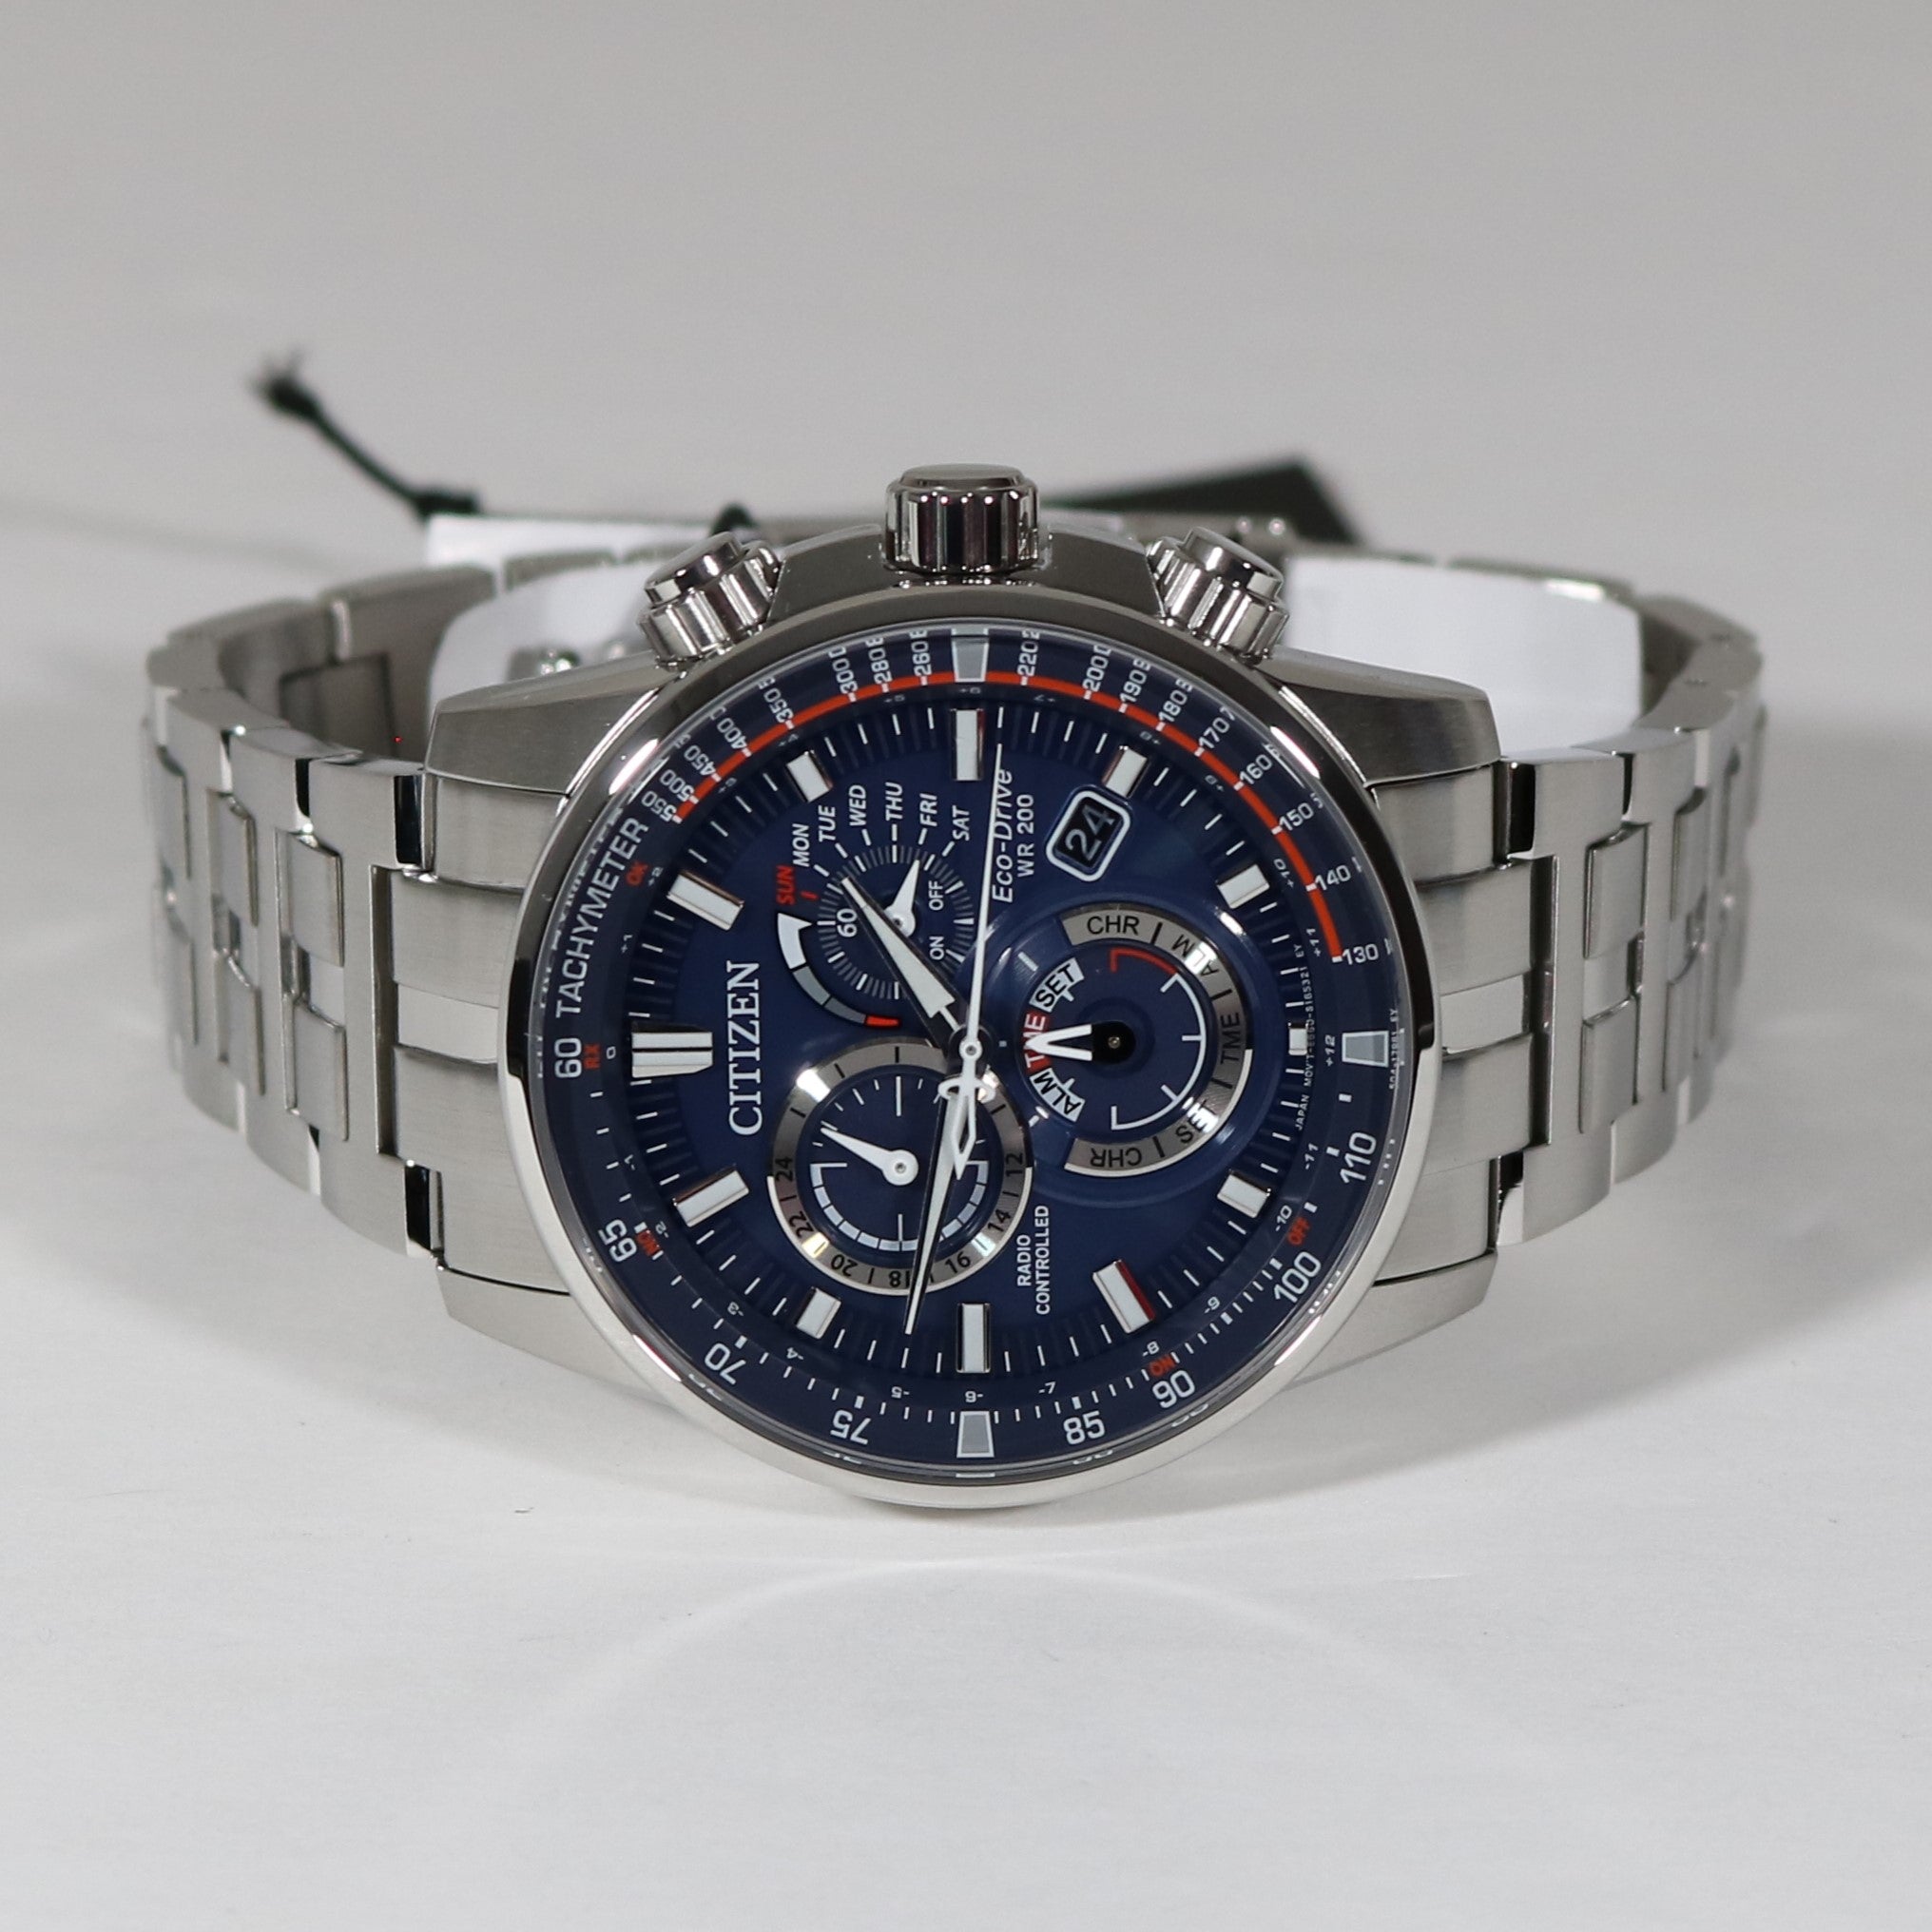 CB5880-5 Blue – Watch Dial Chronobuy Eco-Drive Controlled Citizen PCAT Chronograph